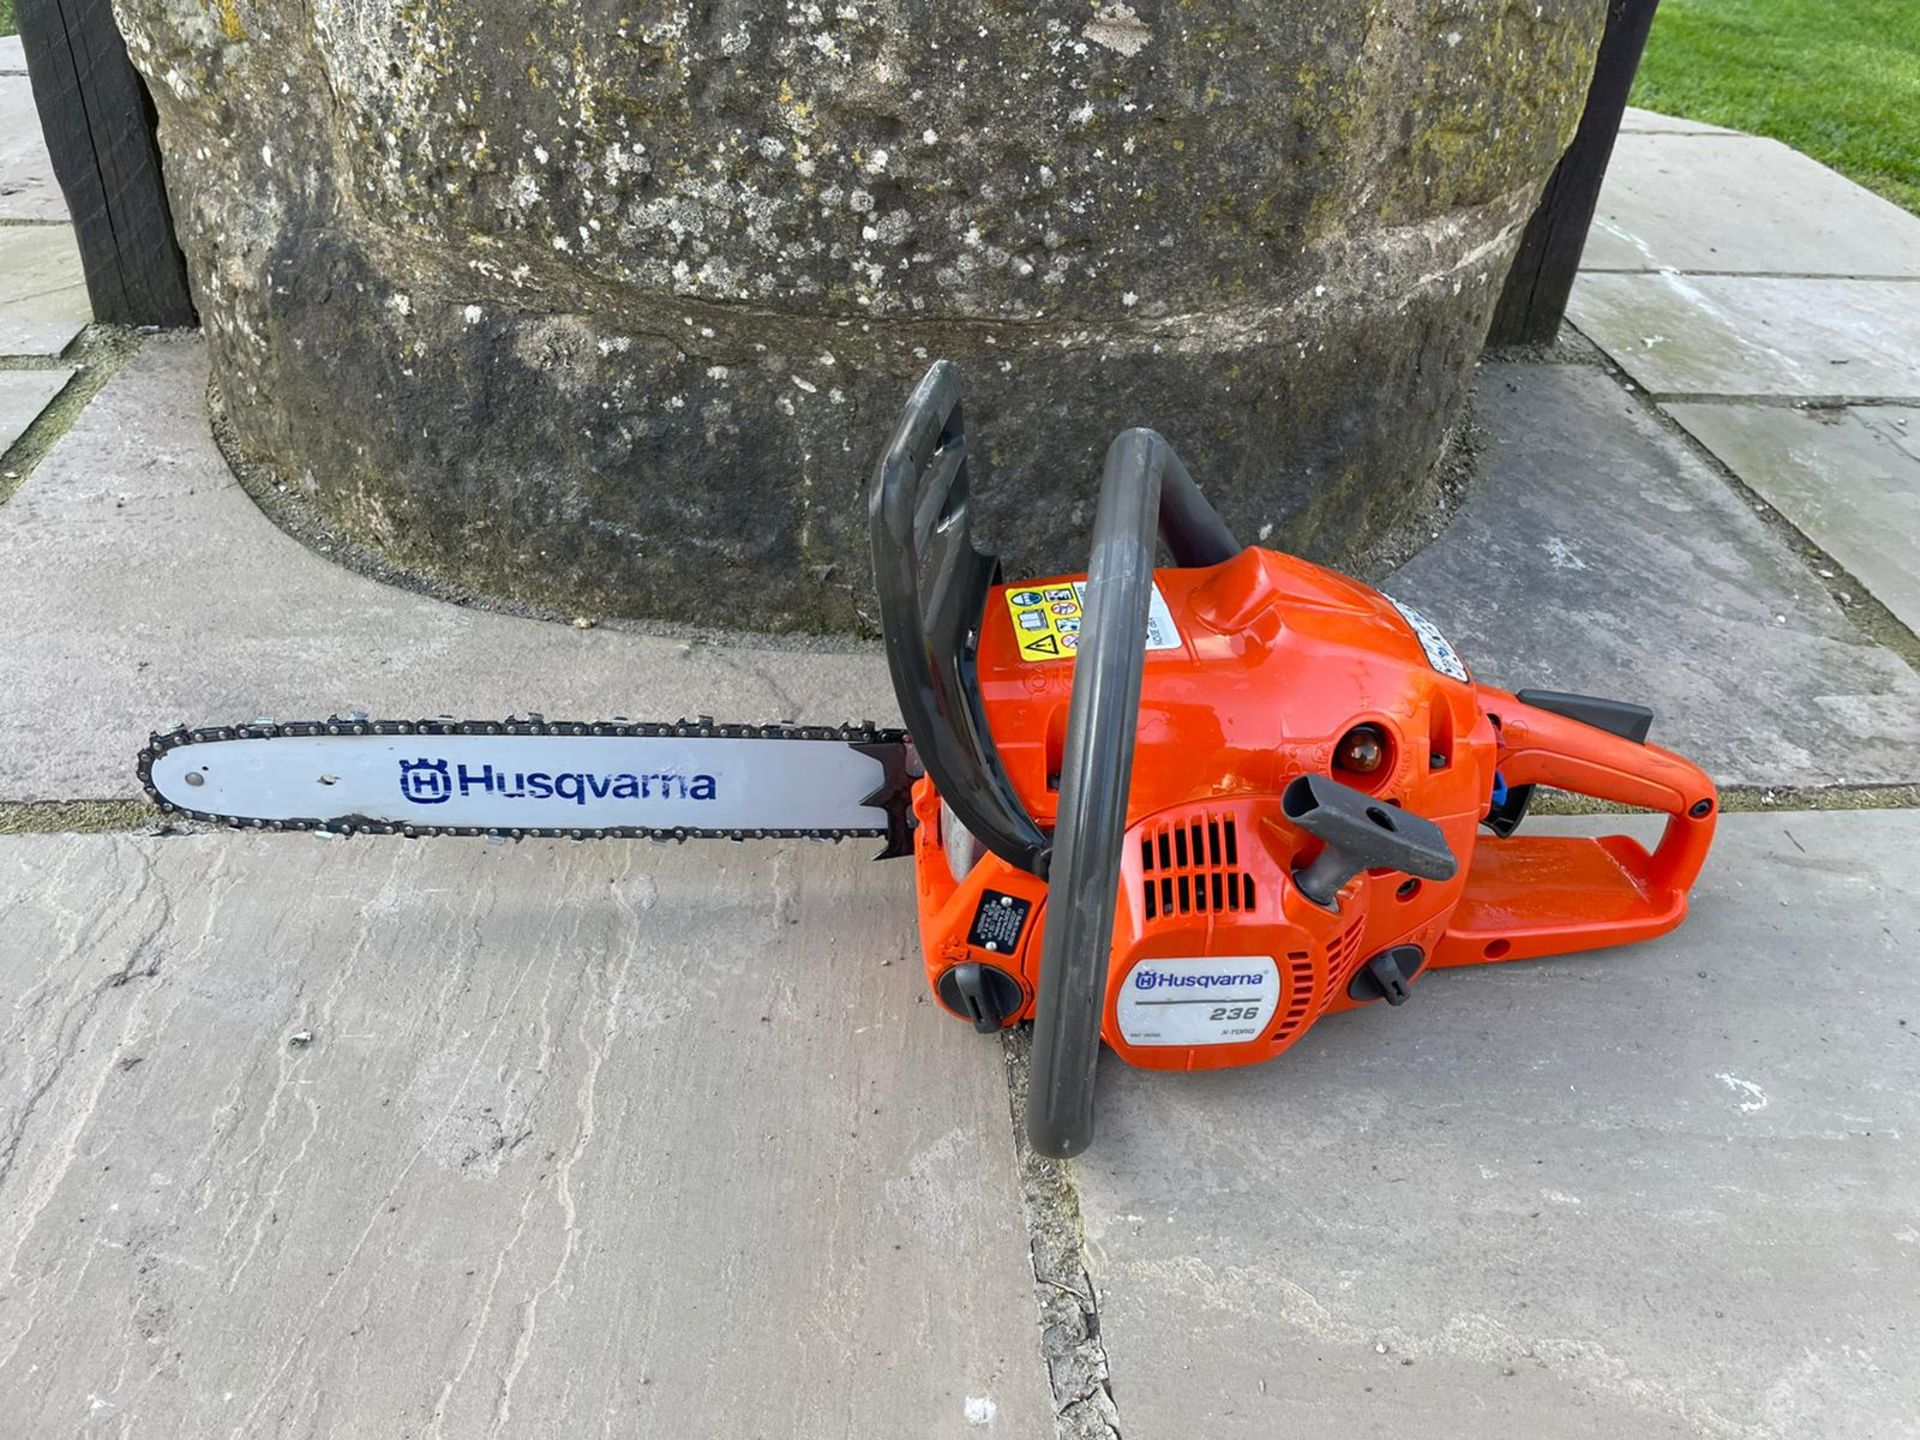 2017 HUSQVARNA 236 CHAINSAW, IN GREAT CONDITION, BOUGHT NEW IN 2018, RUNS AND WORKS *NO VAT*